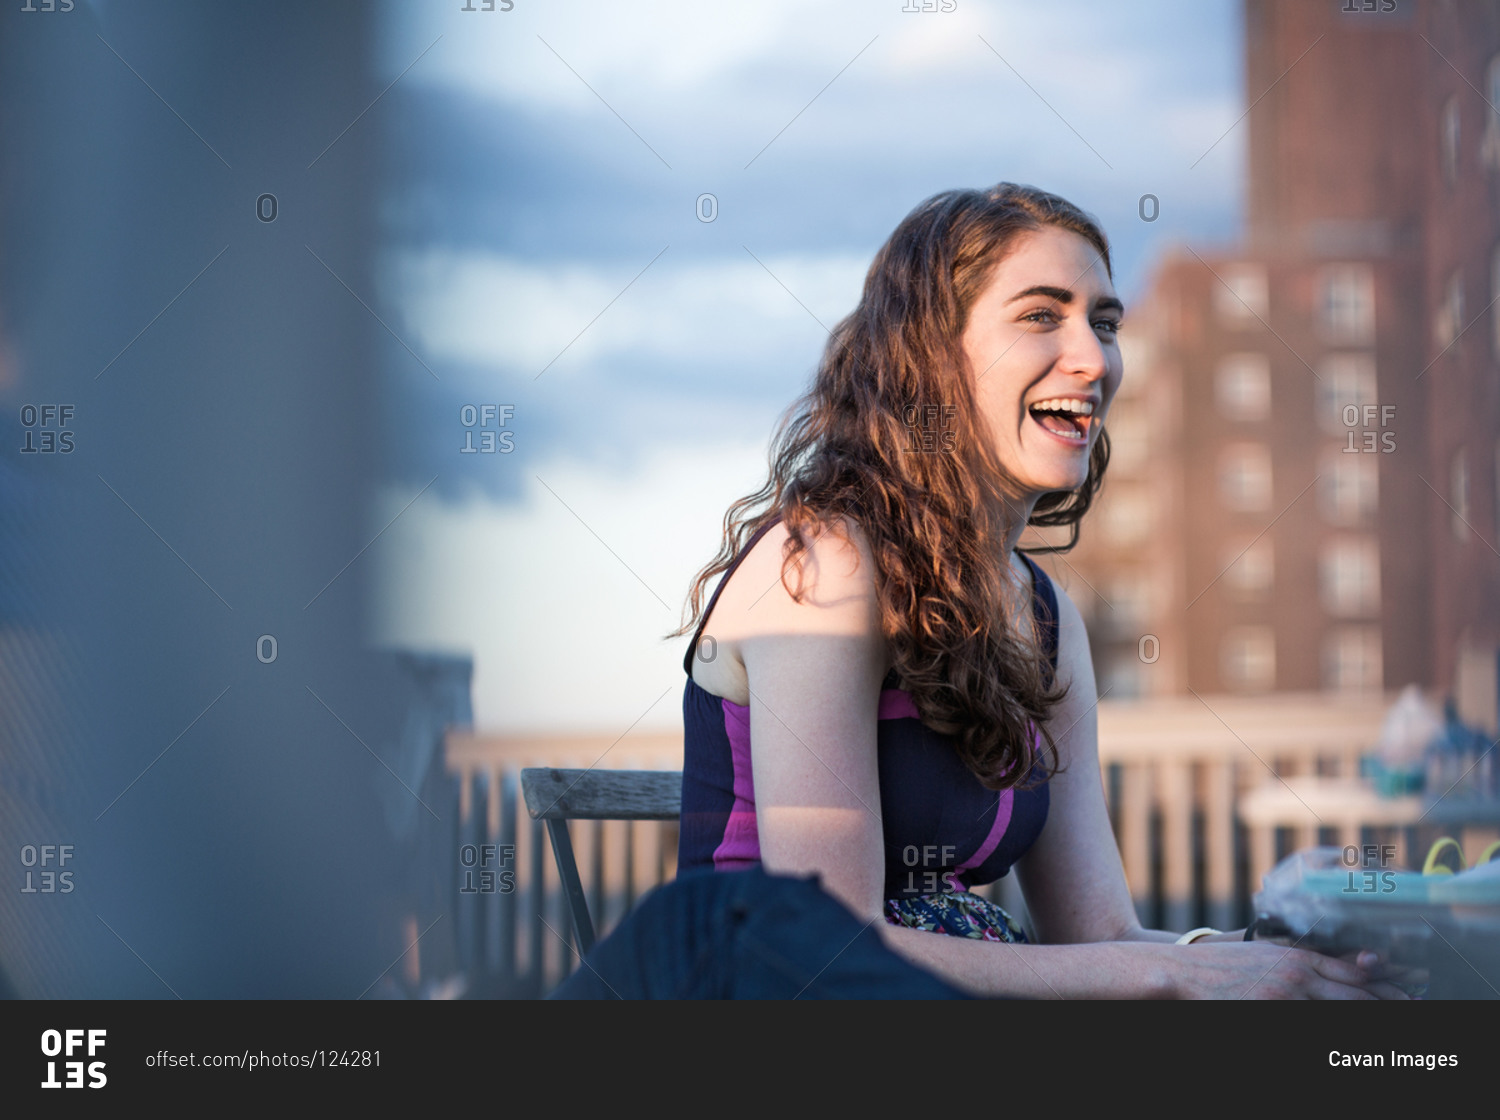 Young woman laughing at rooftop party, Brooklyn